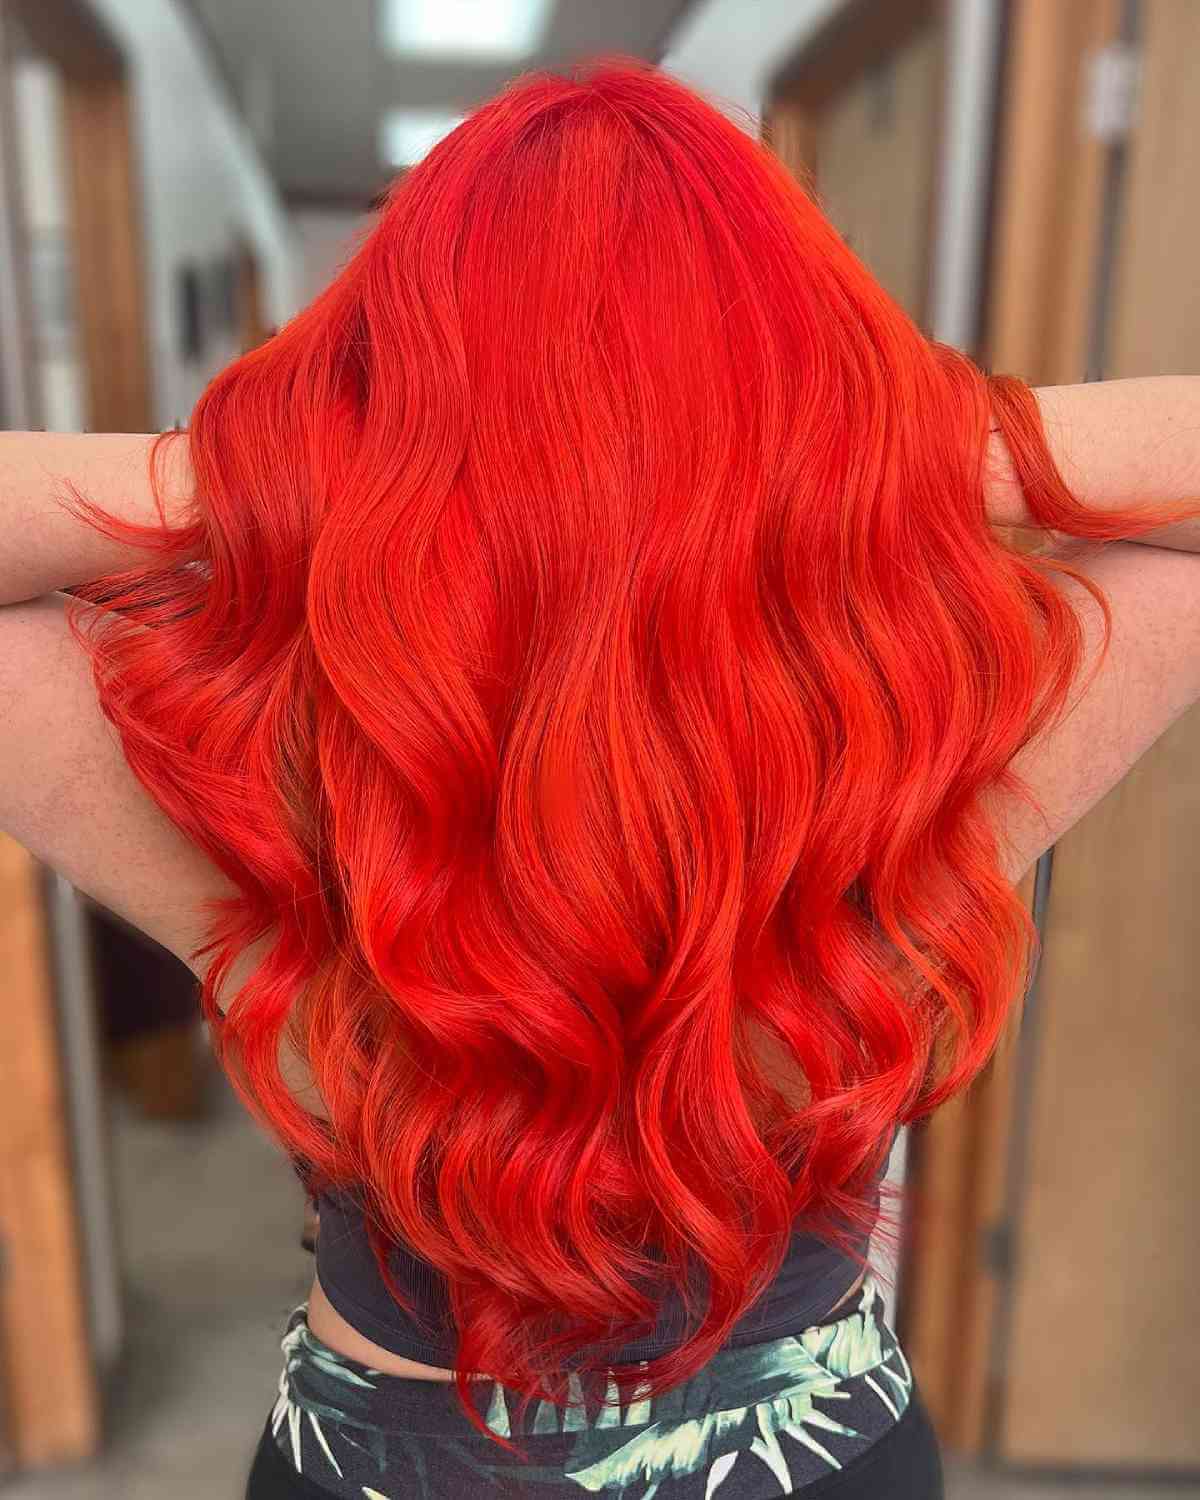 Bright Red Hair Color on Long Locks